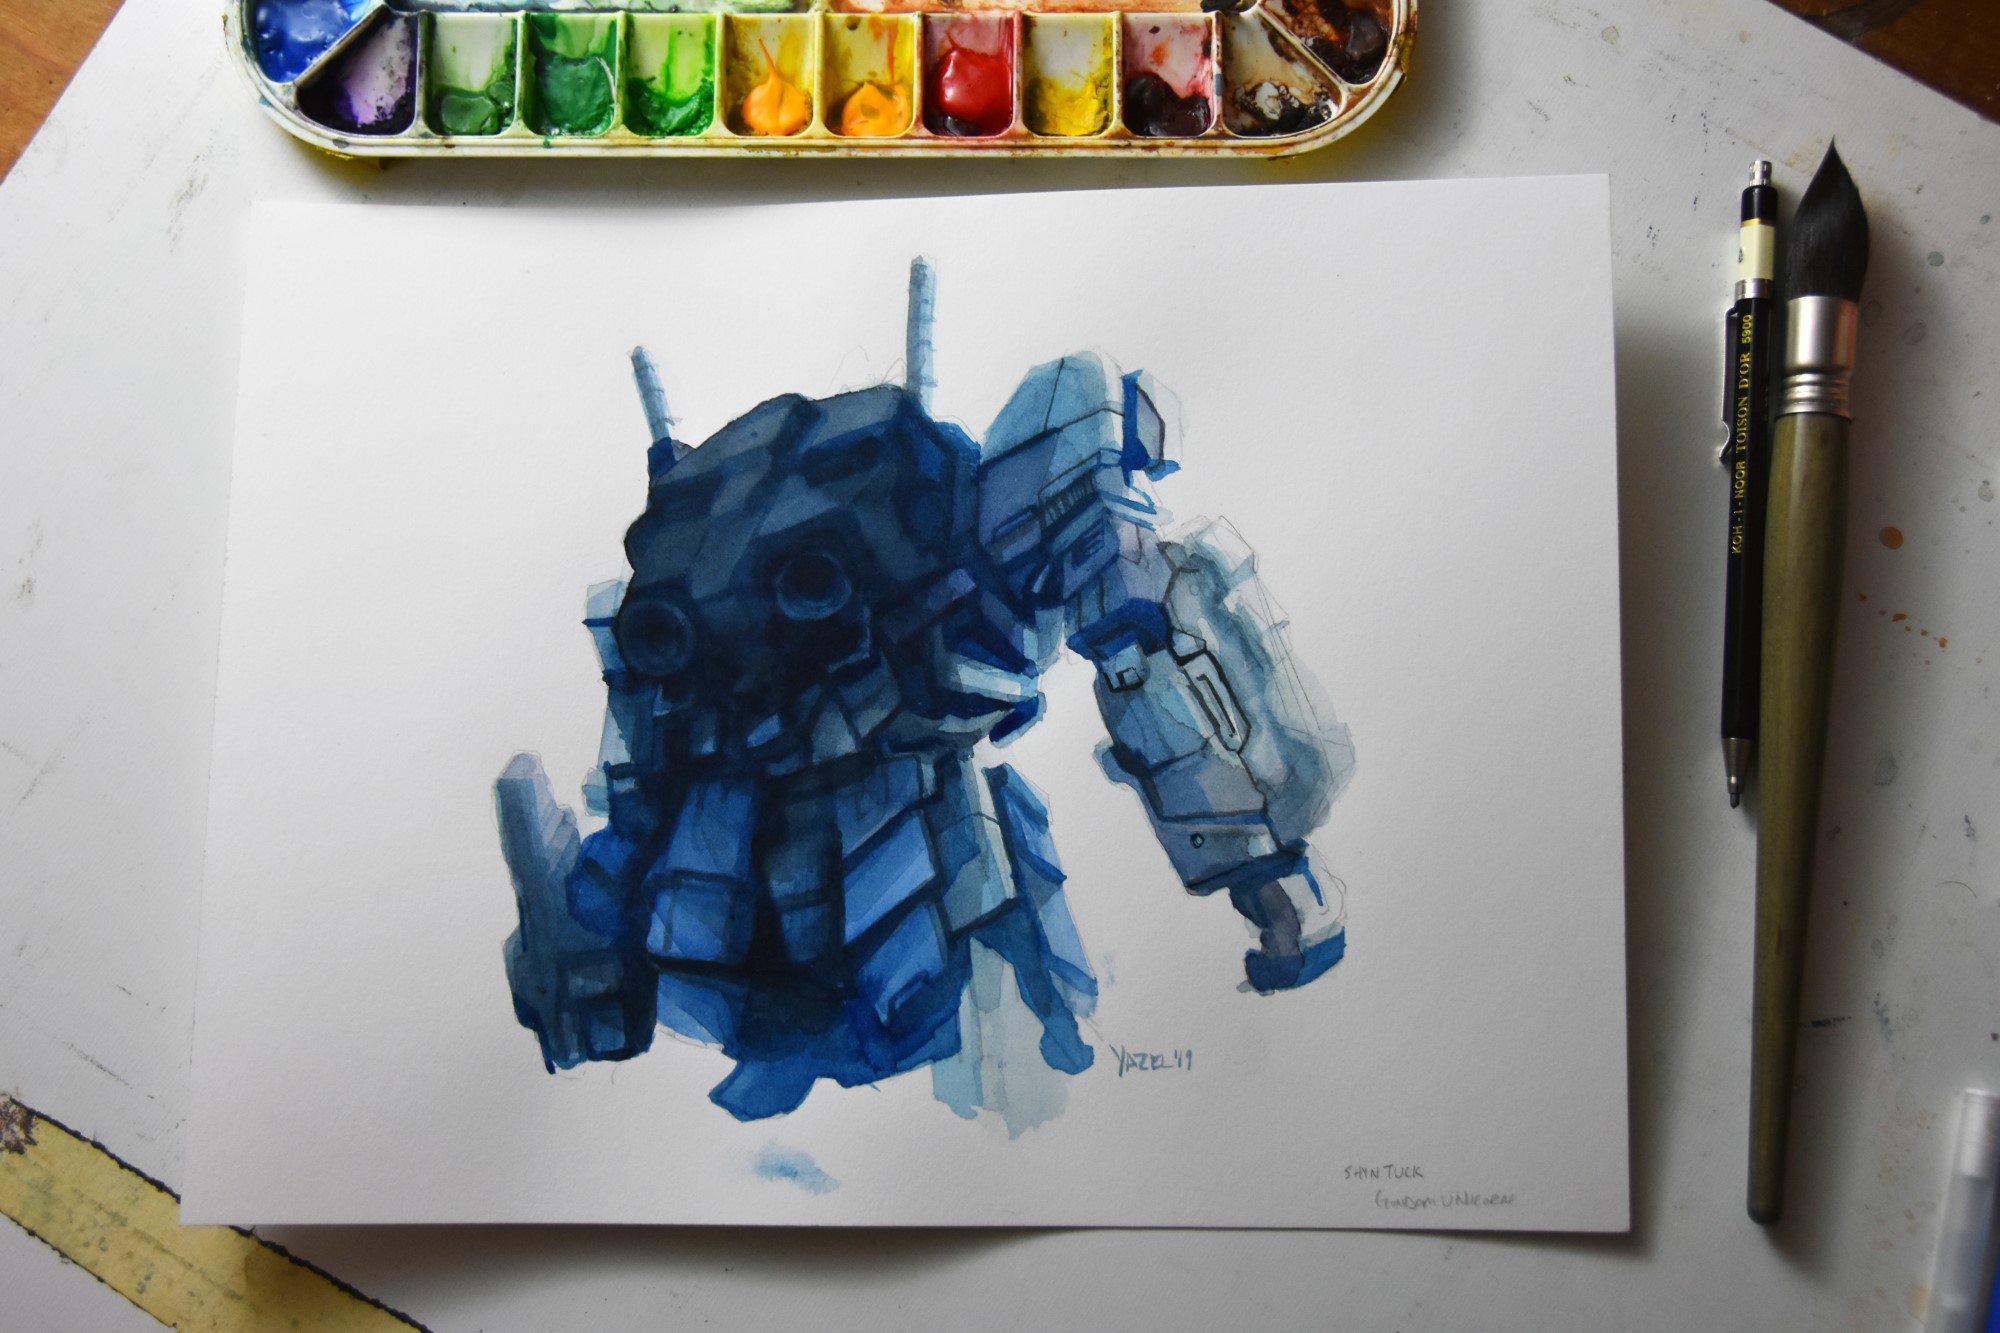  This one is based on a giant gundam statue in Japan. I painted this too dark too fast so it’s a bit of a dud, but I learned a lot how I can work with layered values in watercolor.  